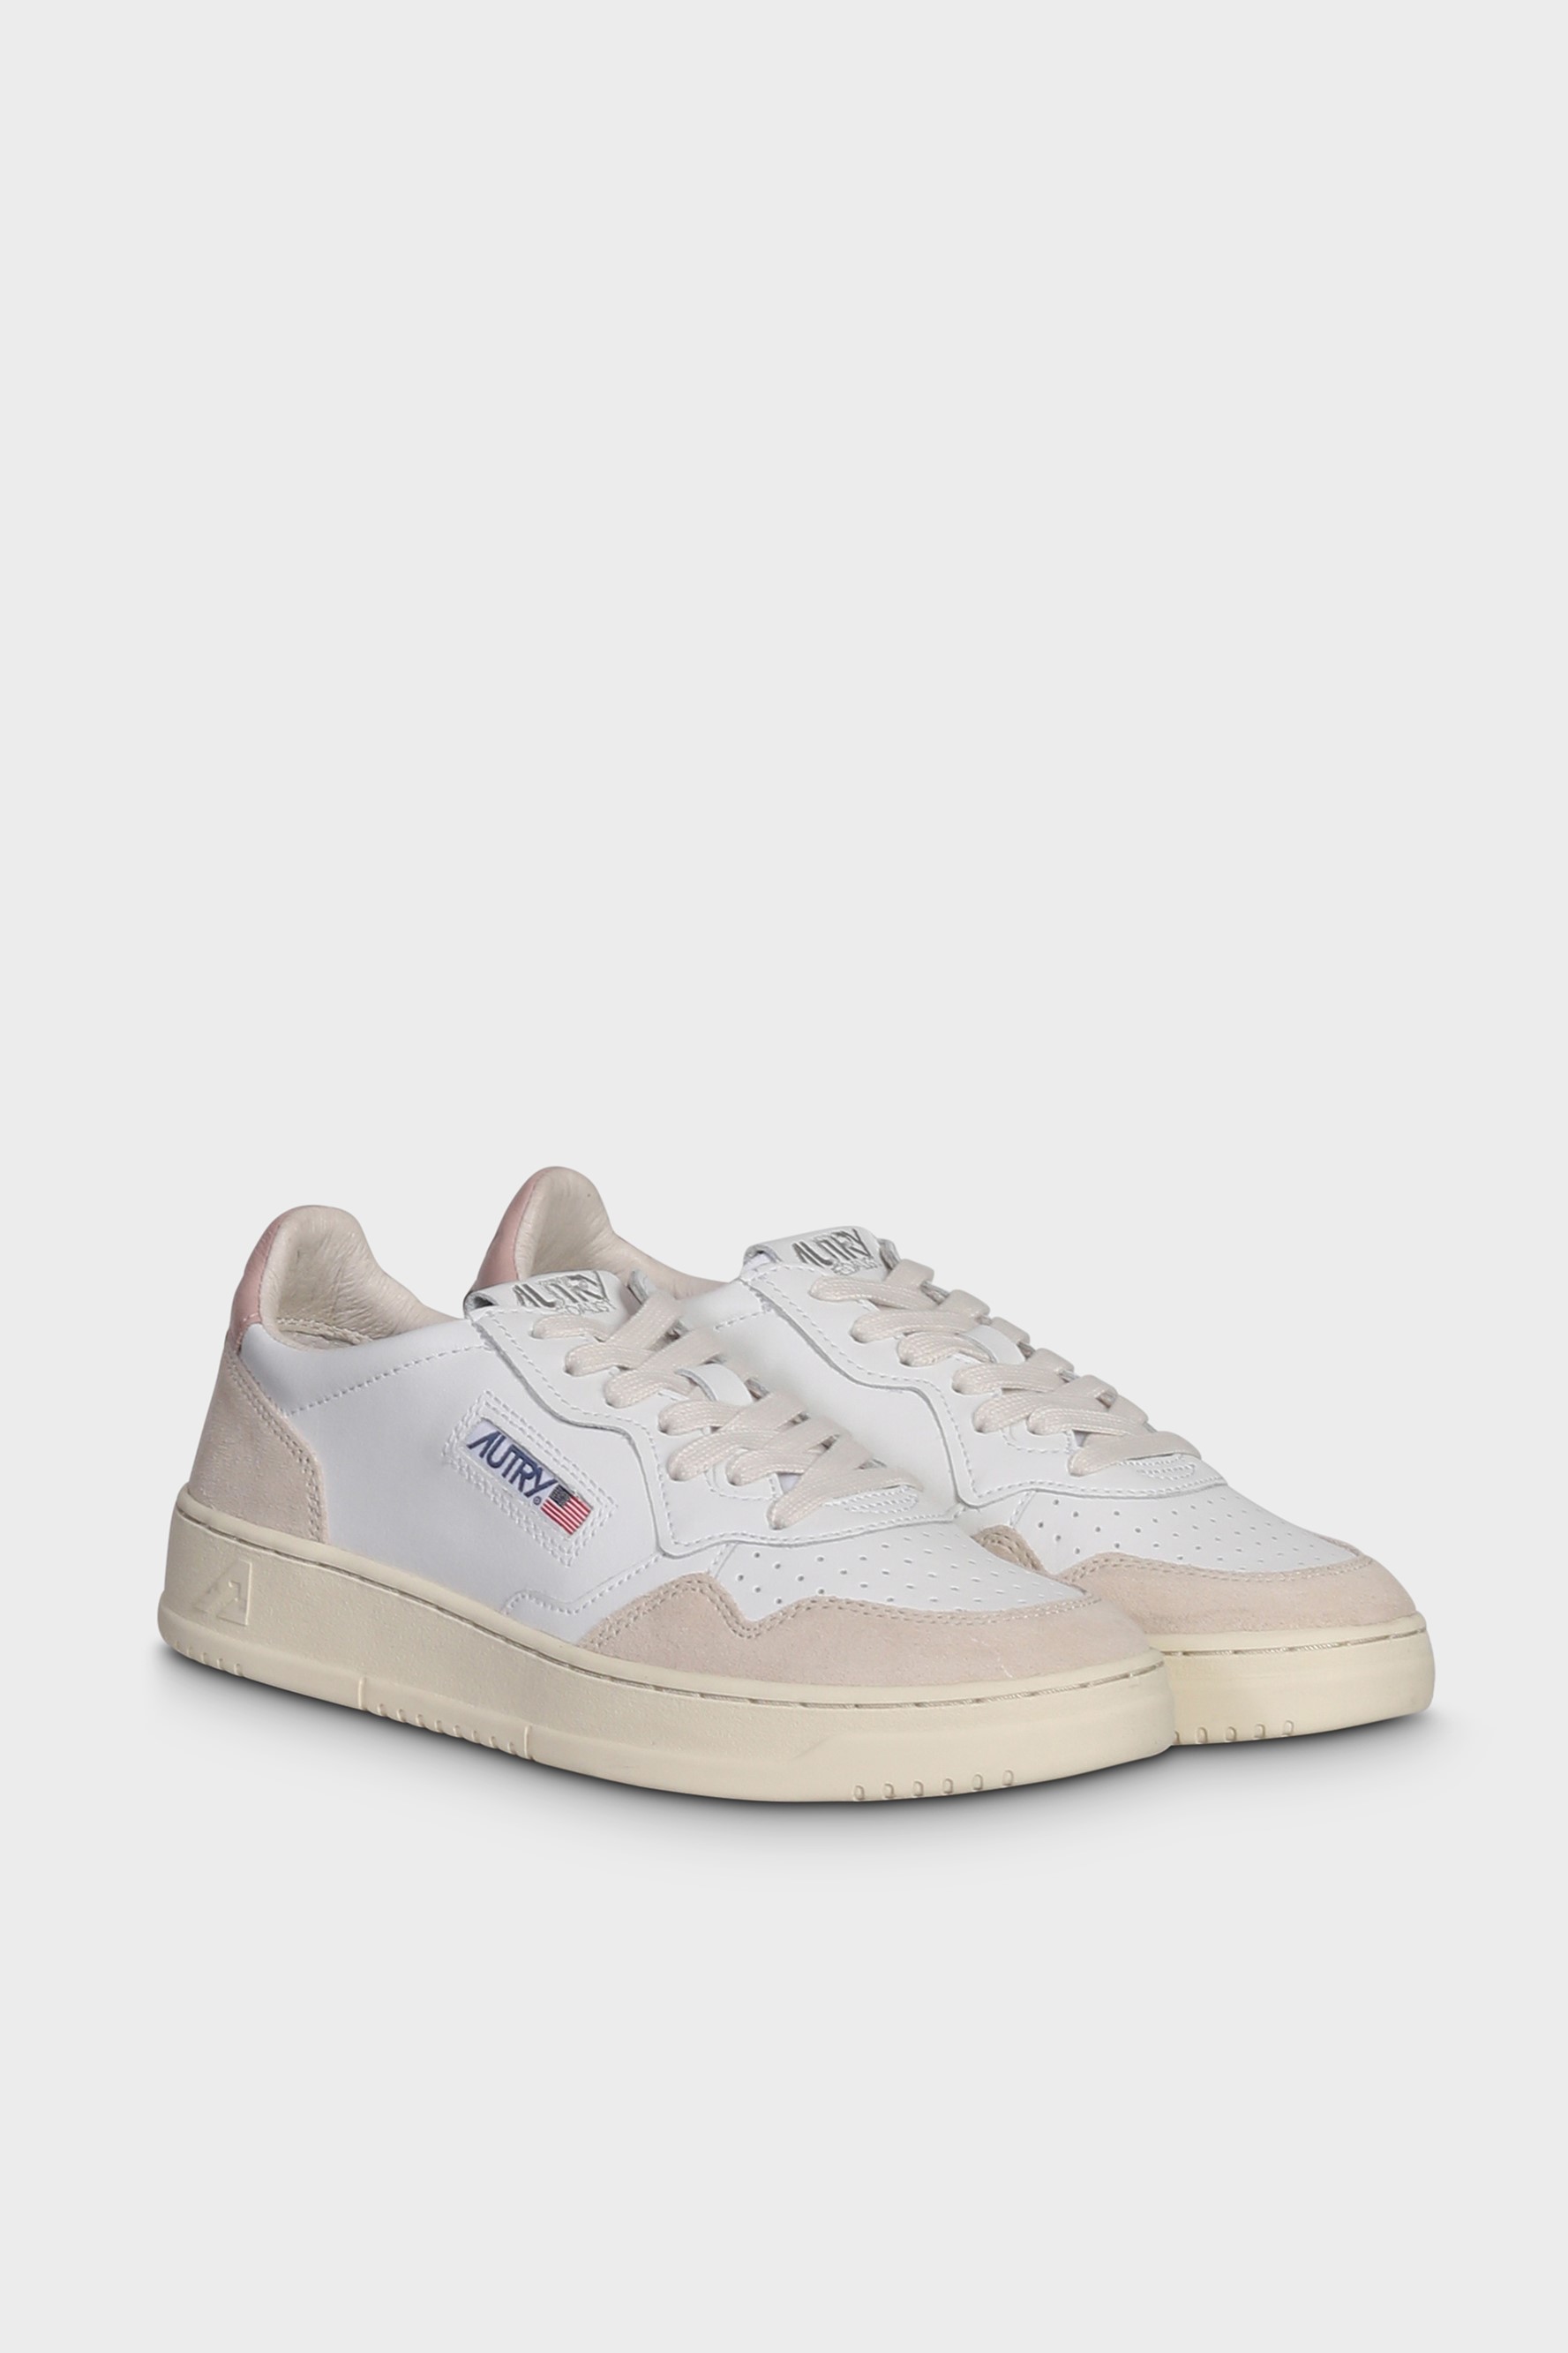 AUTRY ACTION SHOES Medalist Low Sneaker Suede White/Pow 35